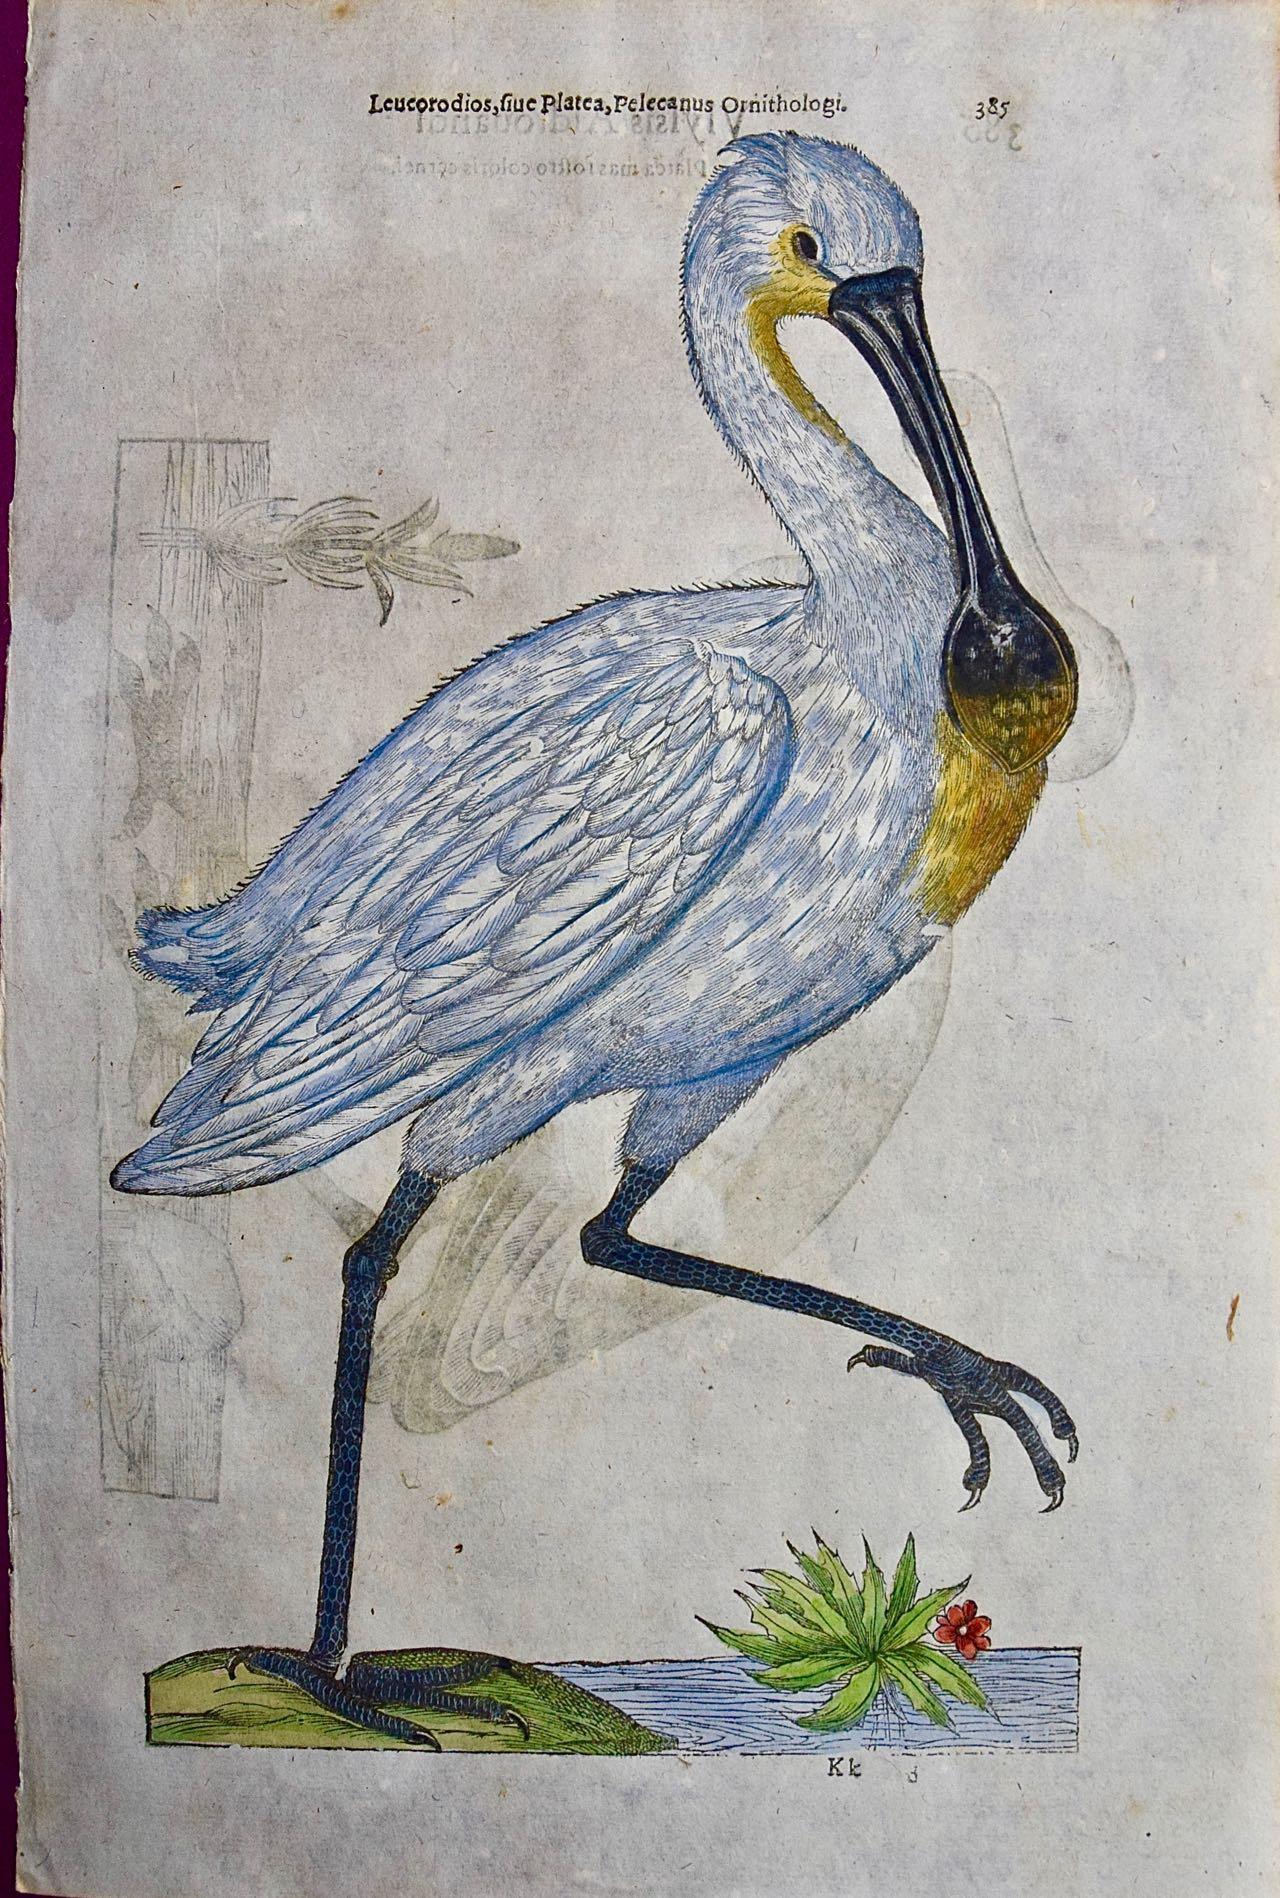 Ulisse Aldrovandi Animal Print - A 16th/17th Century Hand-colored Engraving of a Spoonbill Bird by Aldrovandi